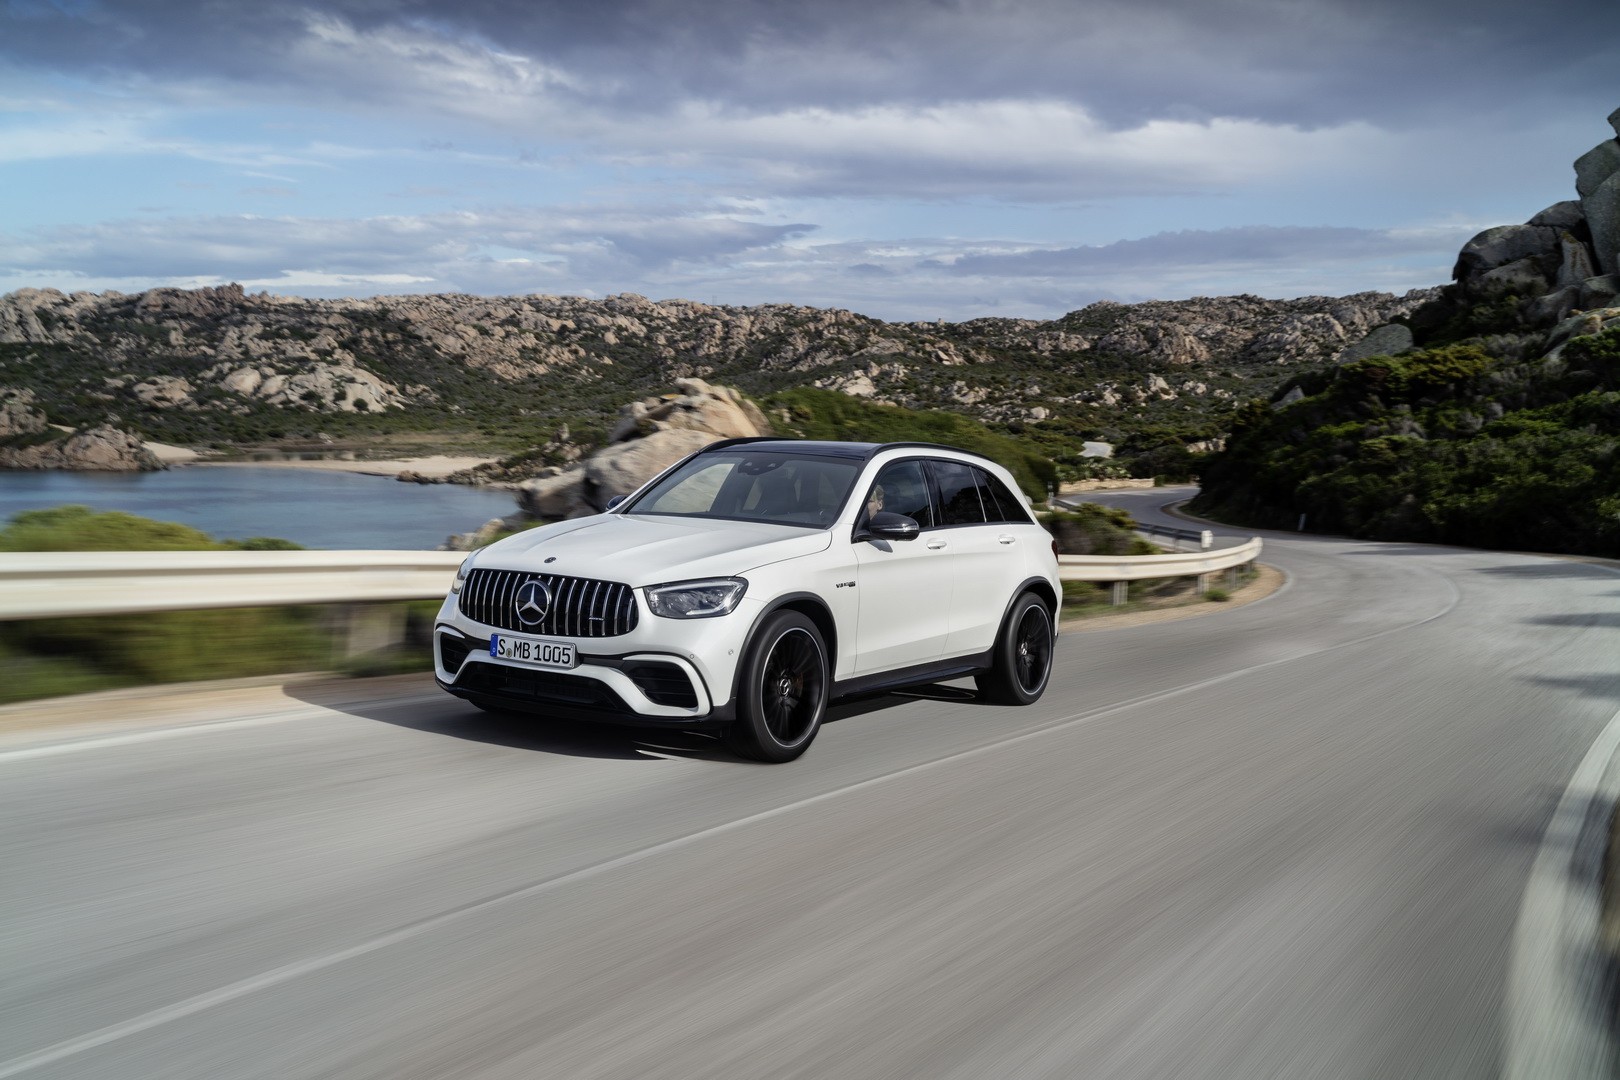 2022-mercedes-amg-glc-63-s-joins-us-range-with-503-hp-will-hit-60-mph-in-36s-1.jpg